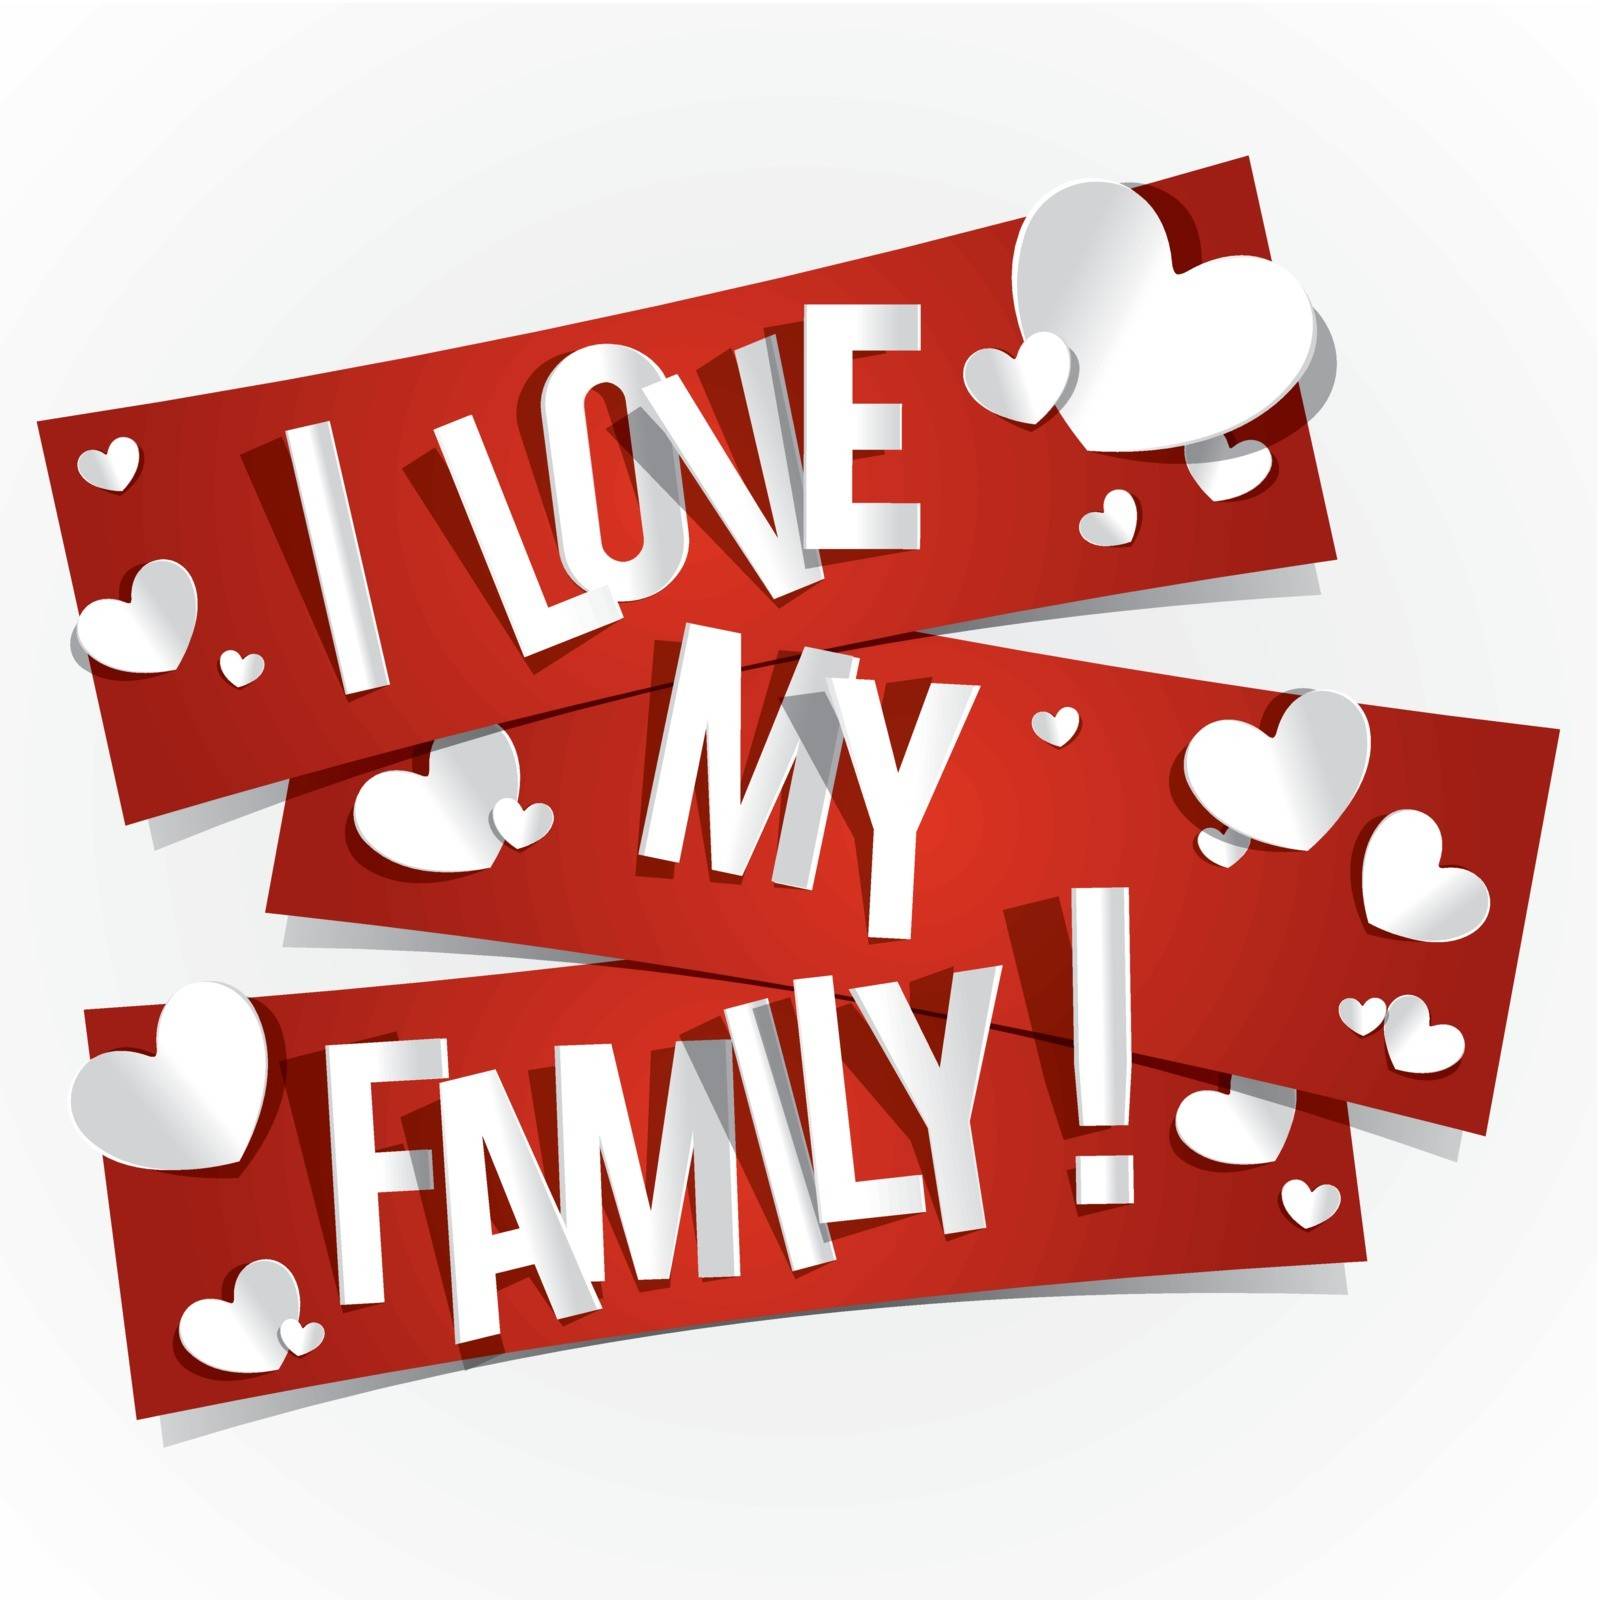 I Love My Family Banners vector illustration